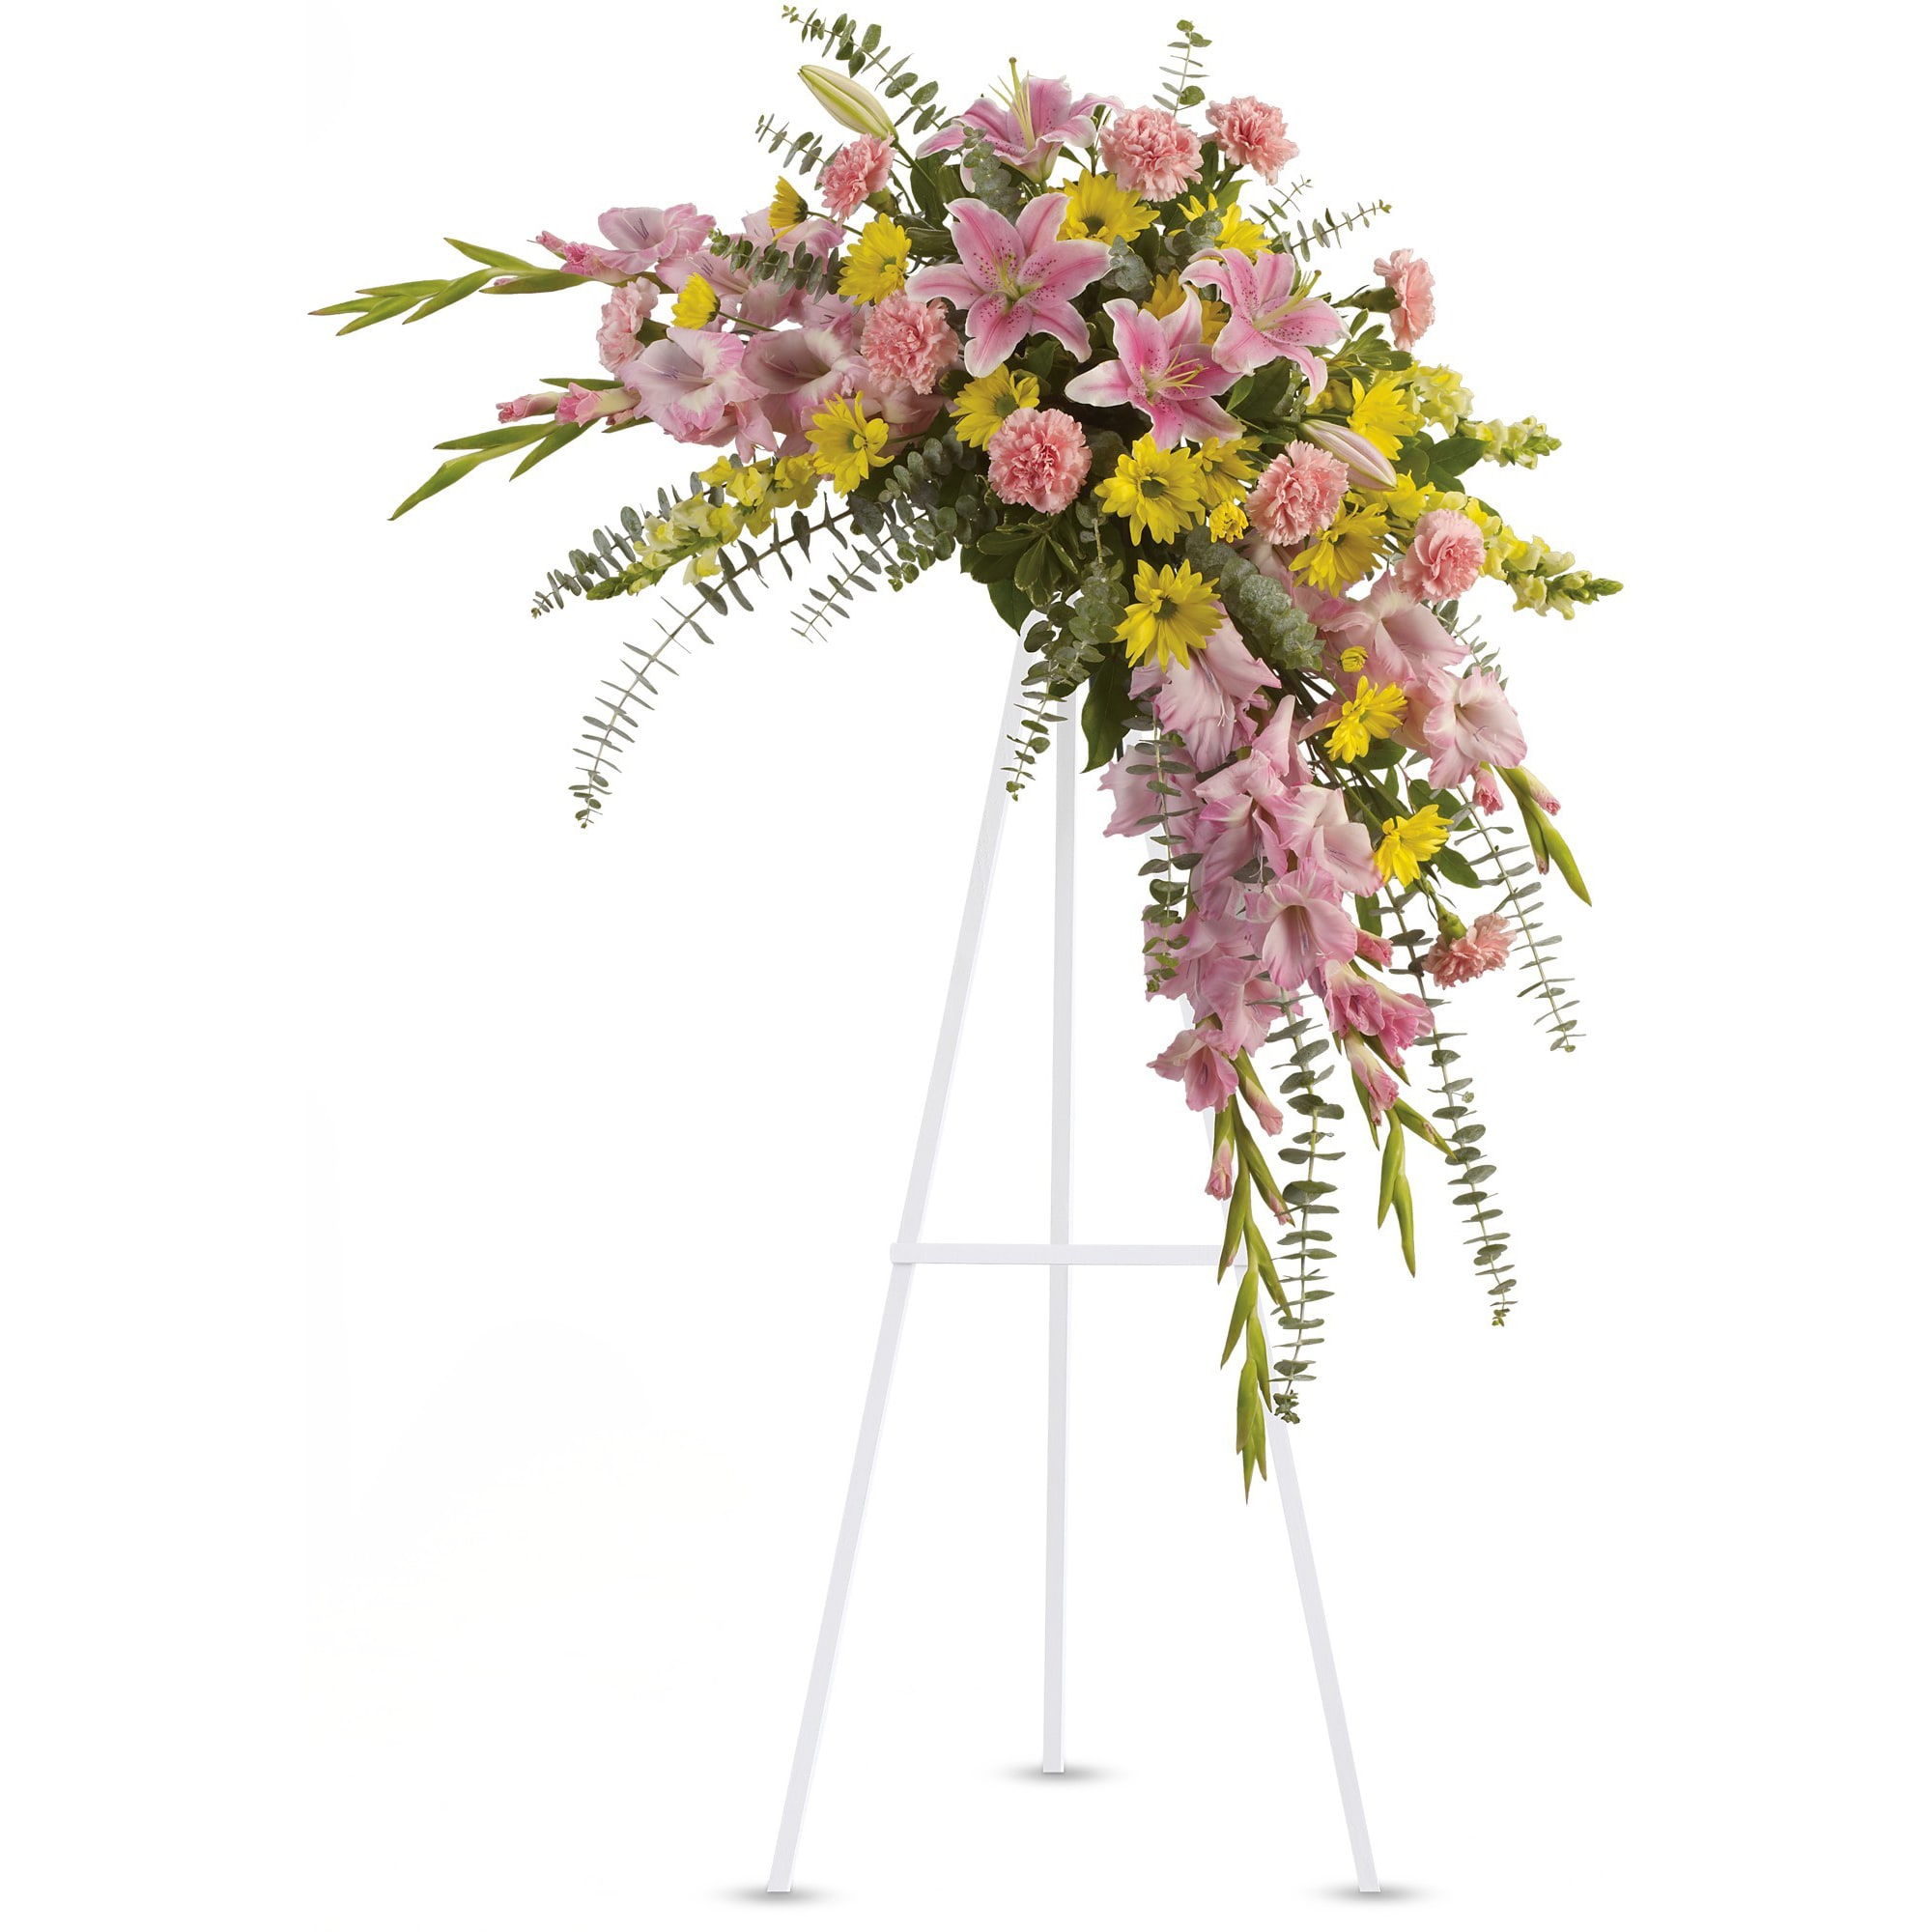 Sweet Solace Spray - Rejoice with this softly dramatic cascade of pink and yellow blooms - lilies, gladioli and chrysanthemums - that has hints of eucalyptus and variegated greens. 